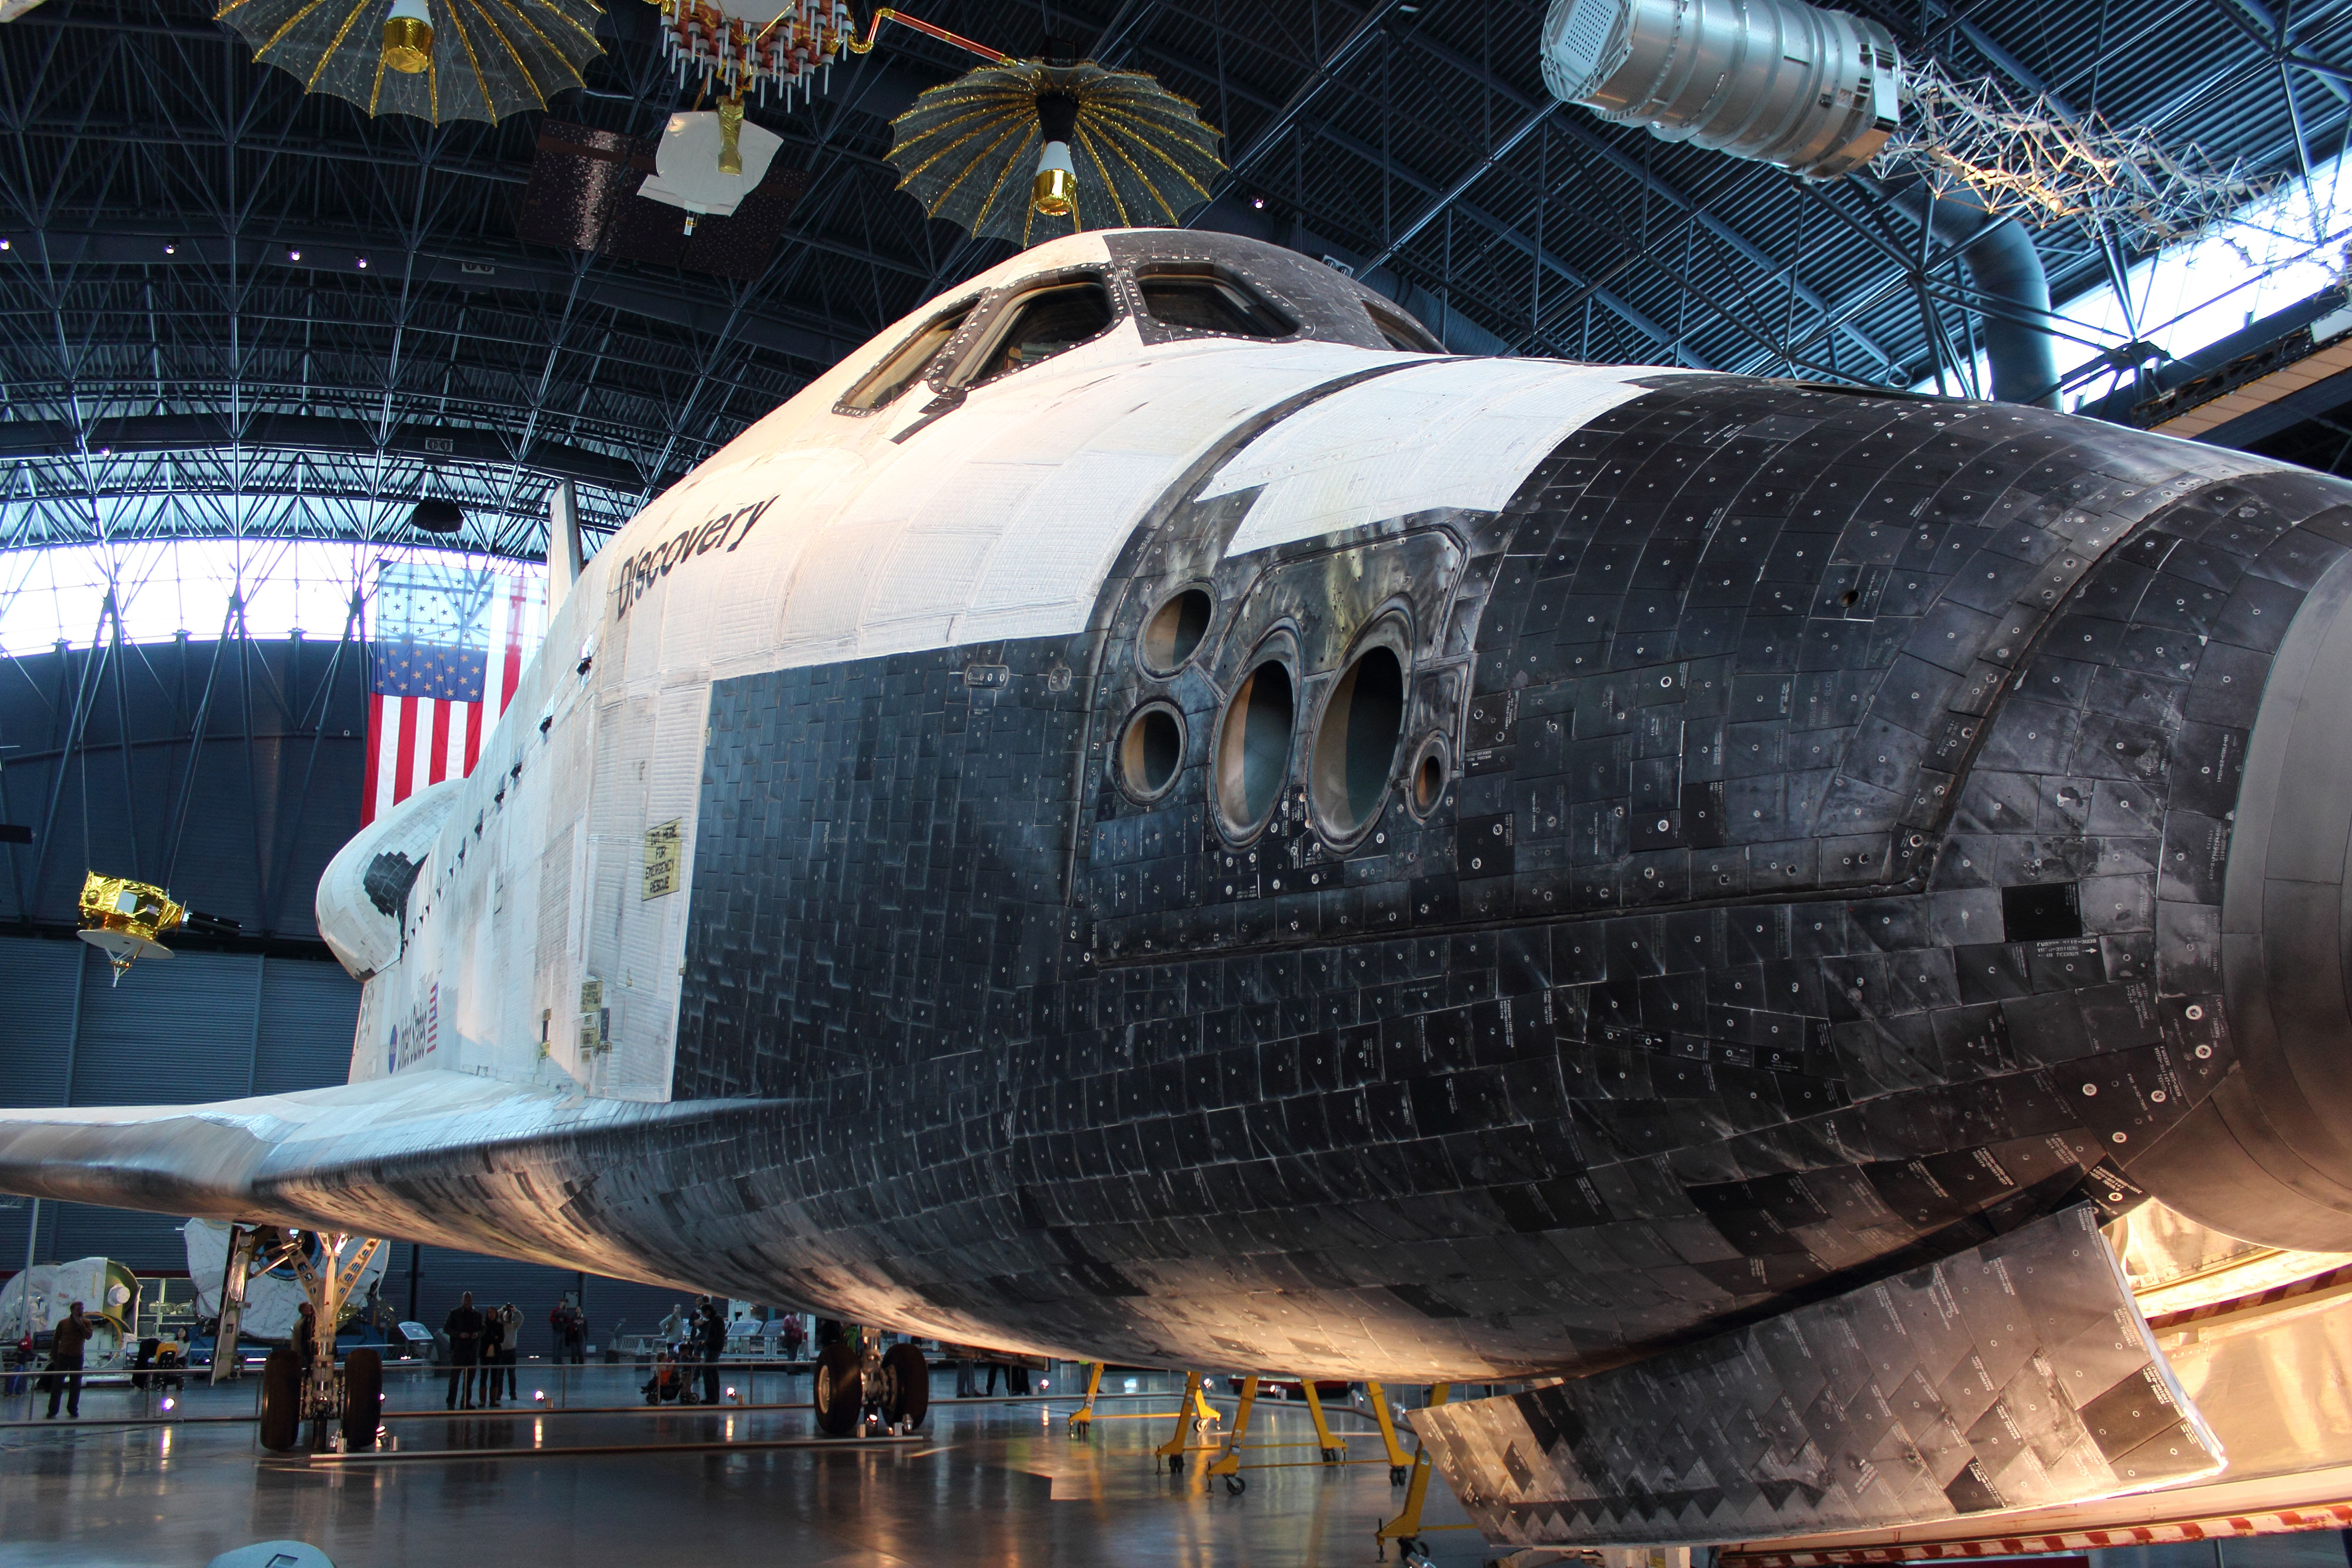 Space Shuttle Discovery on display in the James S. McDonnell Space Hangar in the Steven F. Udvar-Hazy Center. Photo: Lloyd Campbell